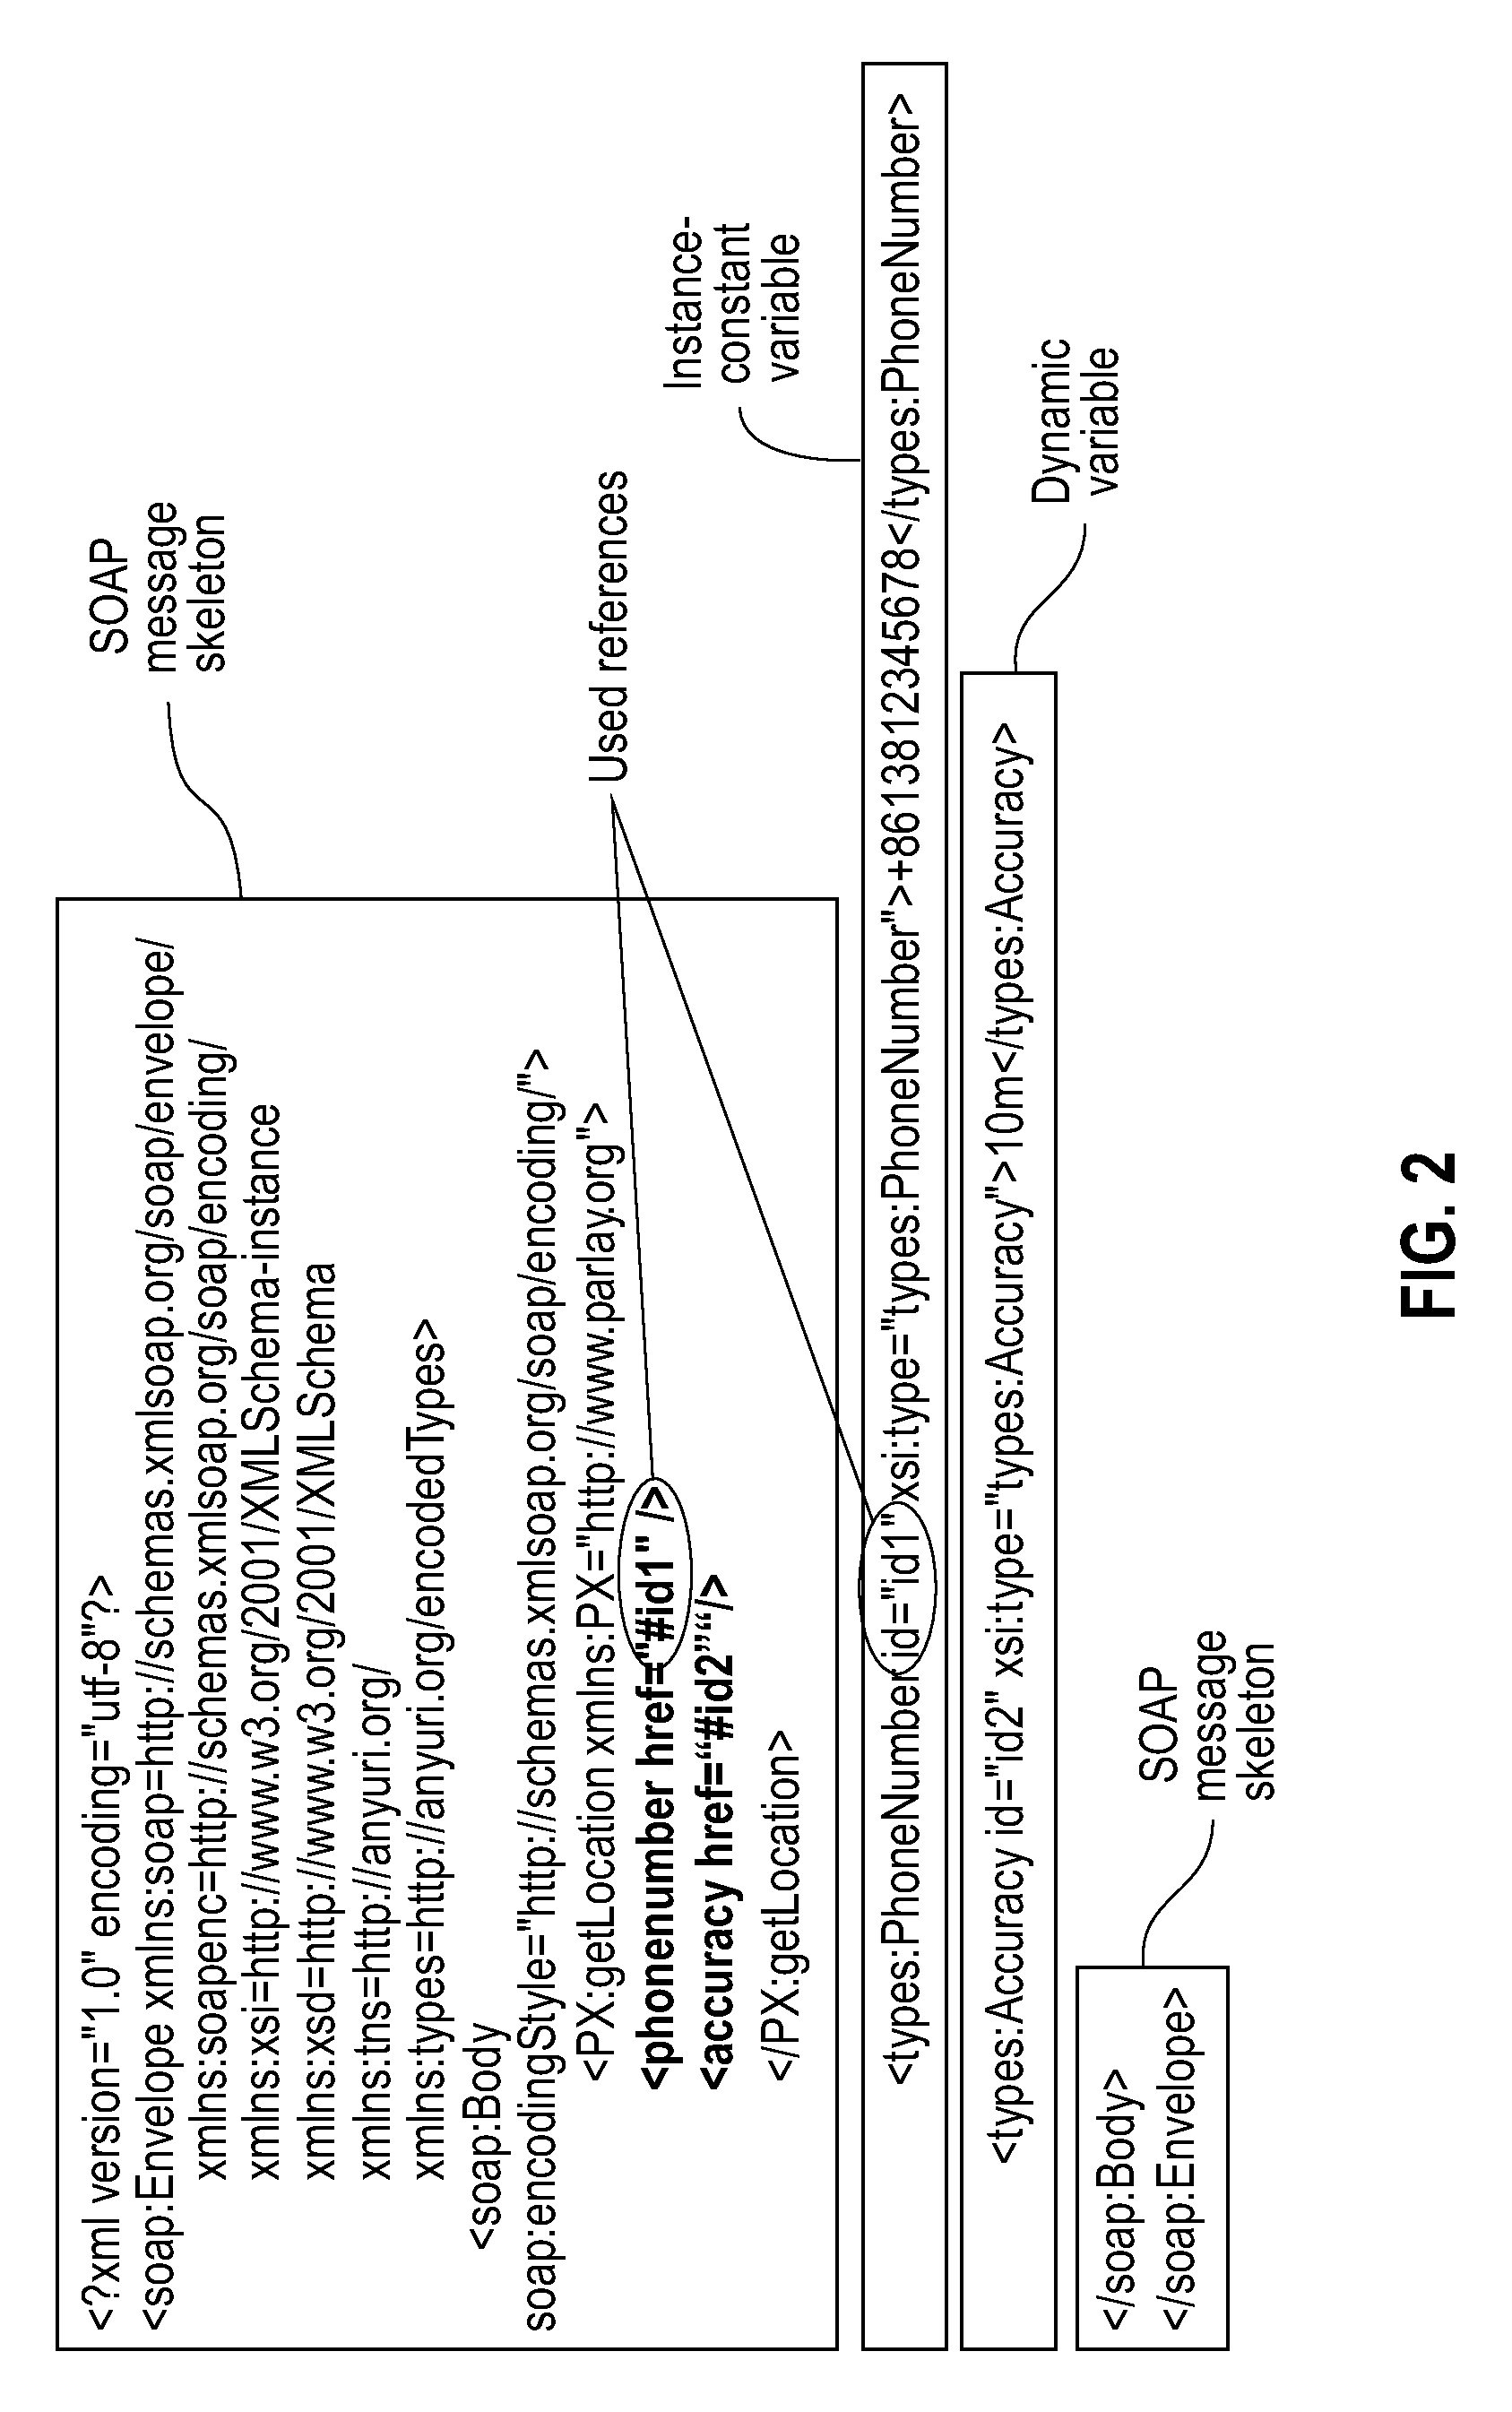 Method For Generating Simple Object Access Protocol Messages and Process Engine